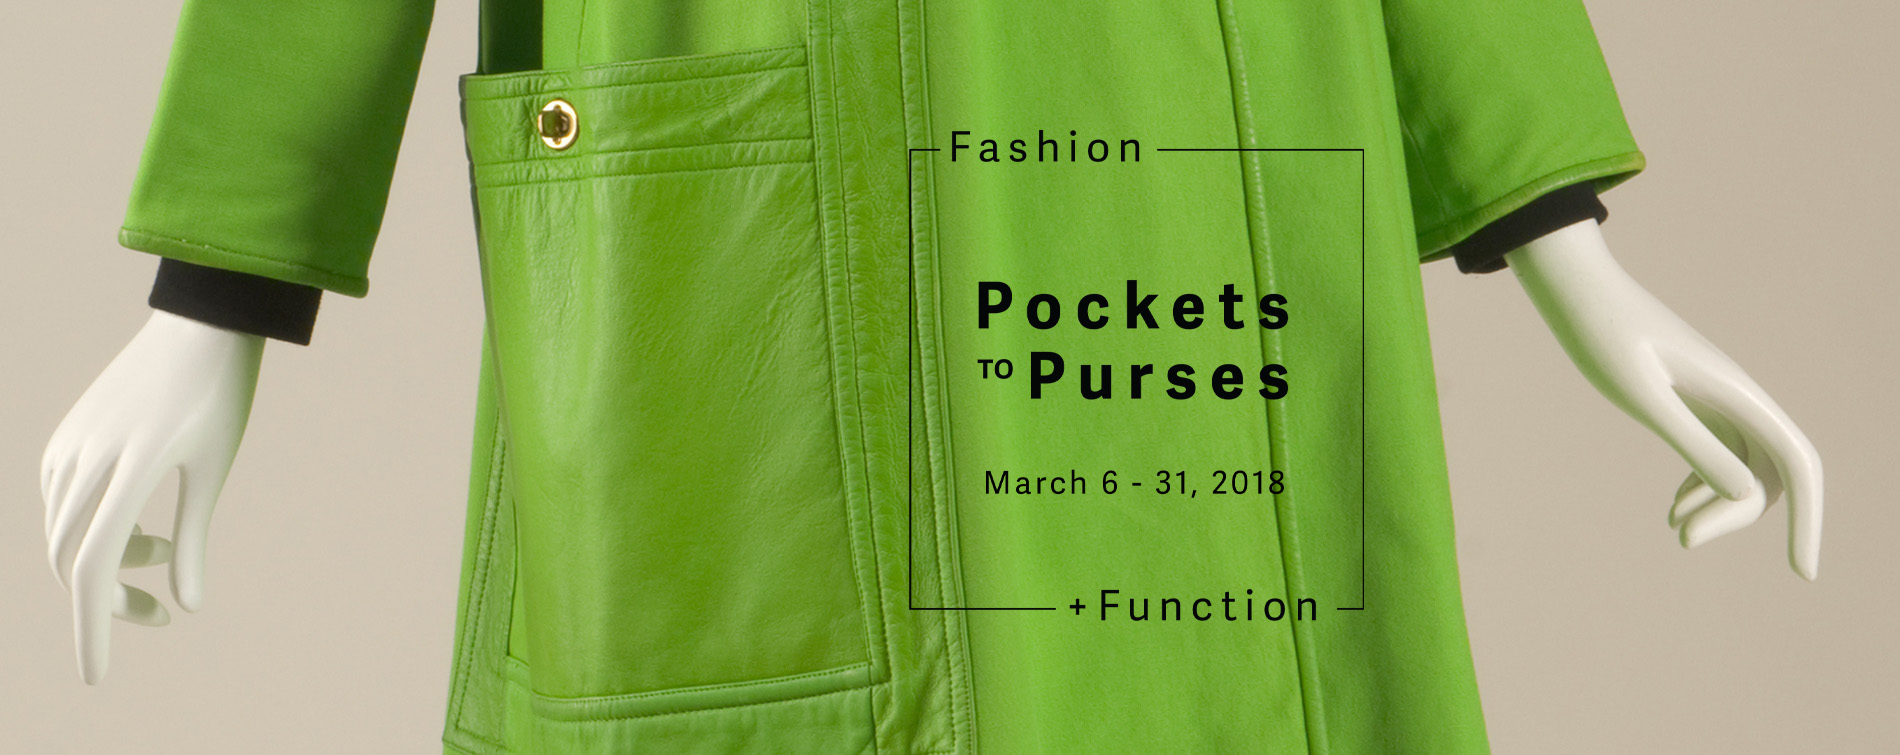 "Pockets to Purses: Fashion + Function" text over green coat with oversized patch pocket